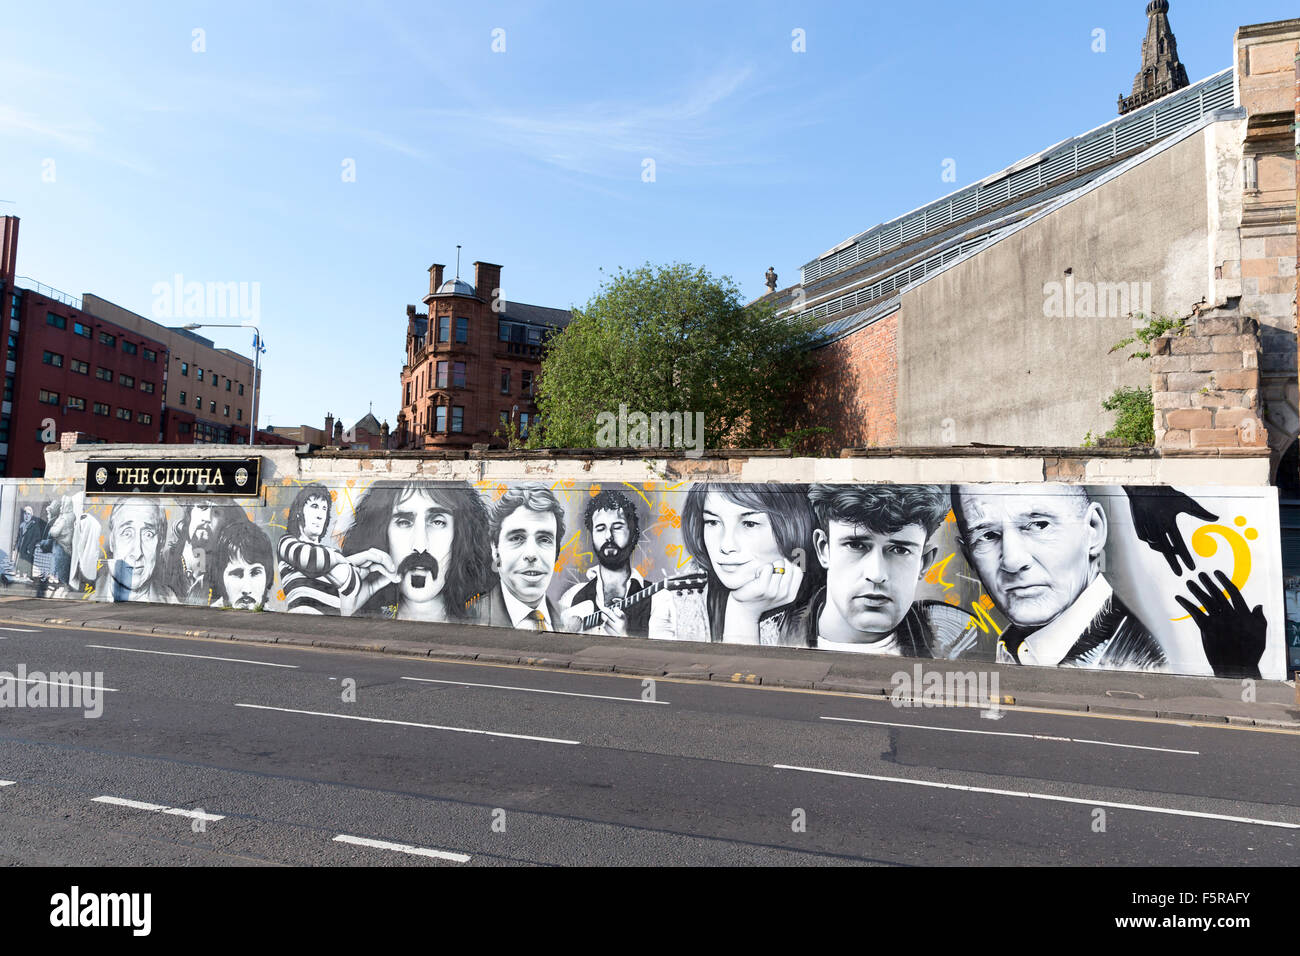 GLASGOW, Scotland. 11 June 2015: The Mural, featuring Spike Milligan & Frank Zappa, at the remains of the Clutha Bar, Glasgow Stock Photo